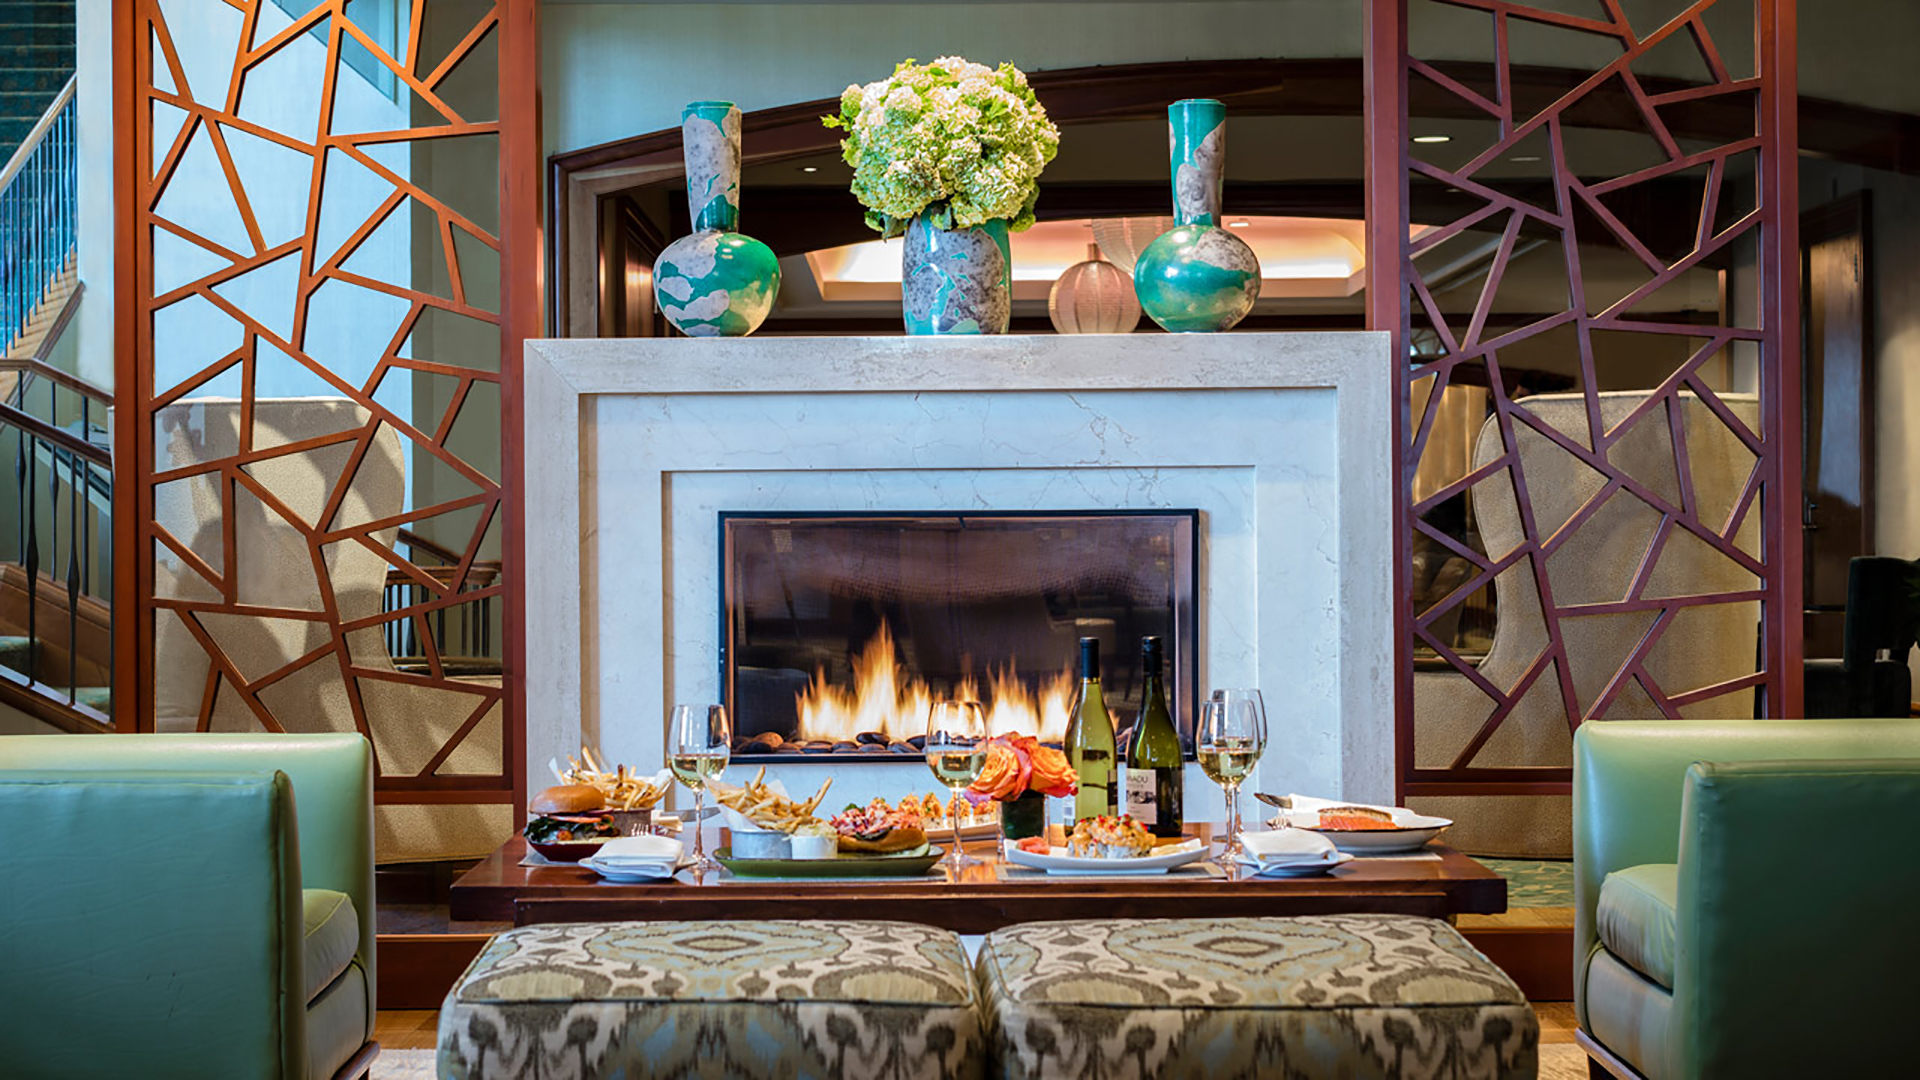 seaport hotel tamo fireplace with food